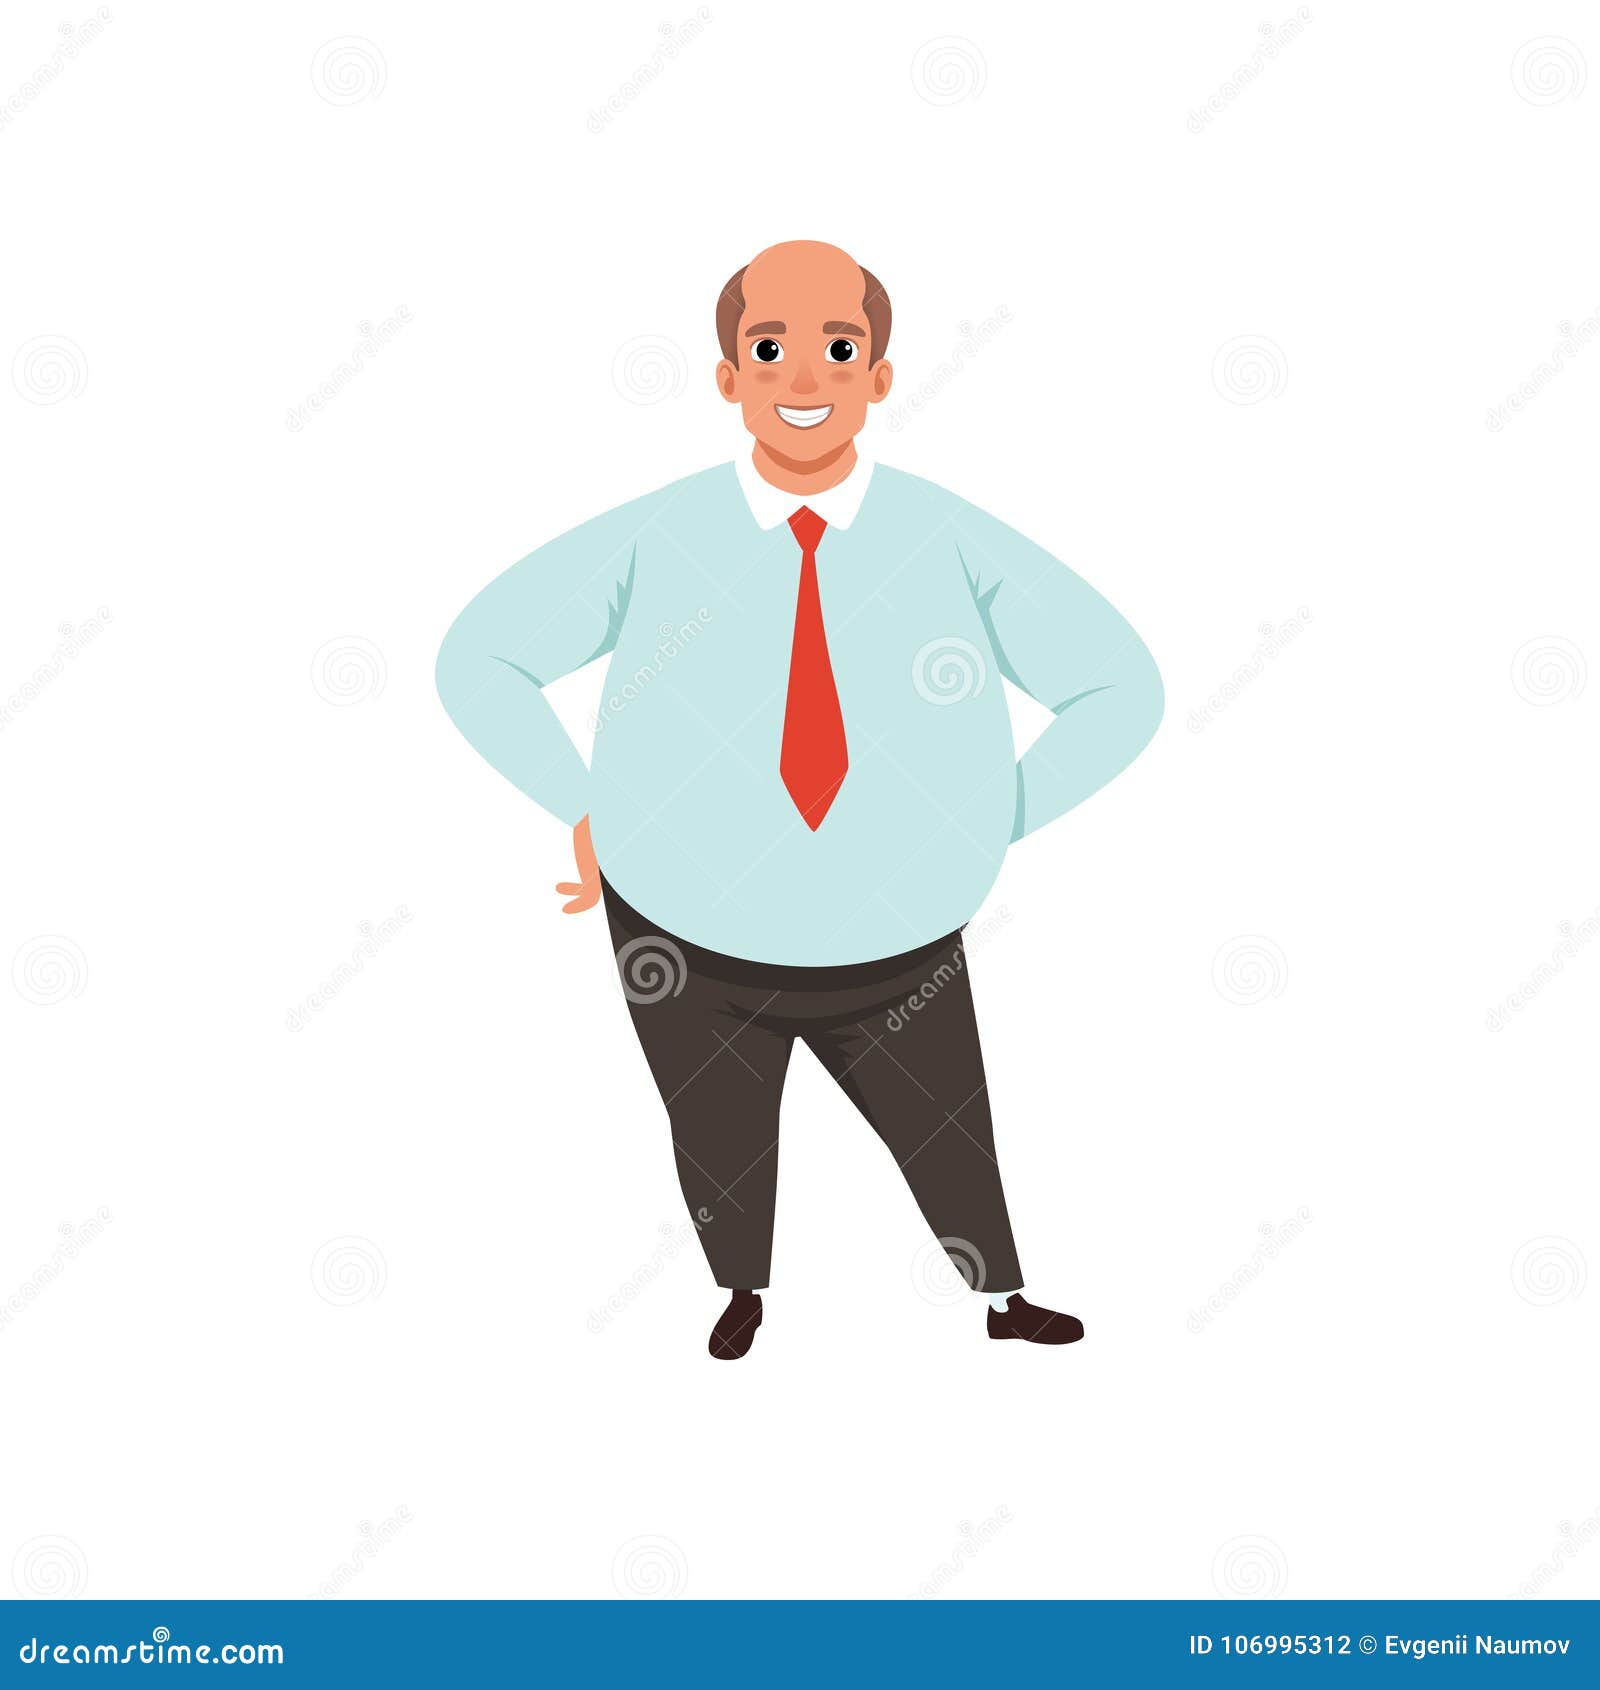 Fat Adult Man with Bald Head. Cartoon Male Character in Formal Clothing ...